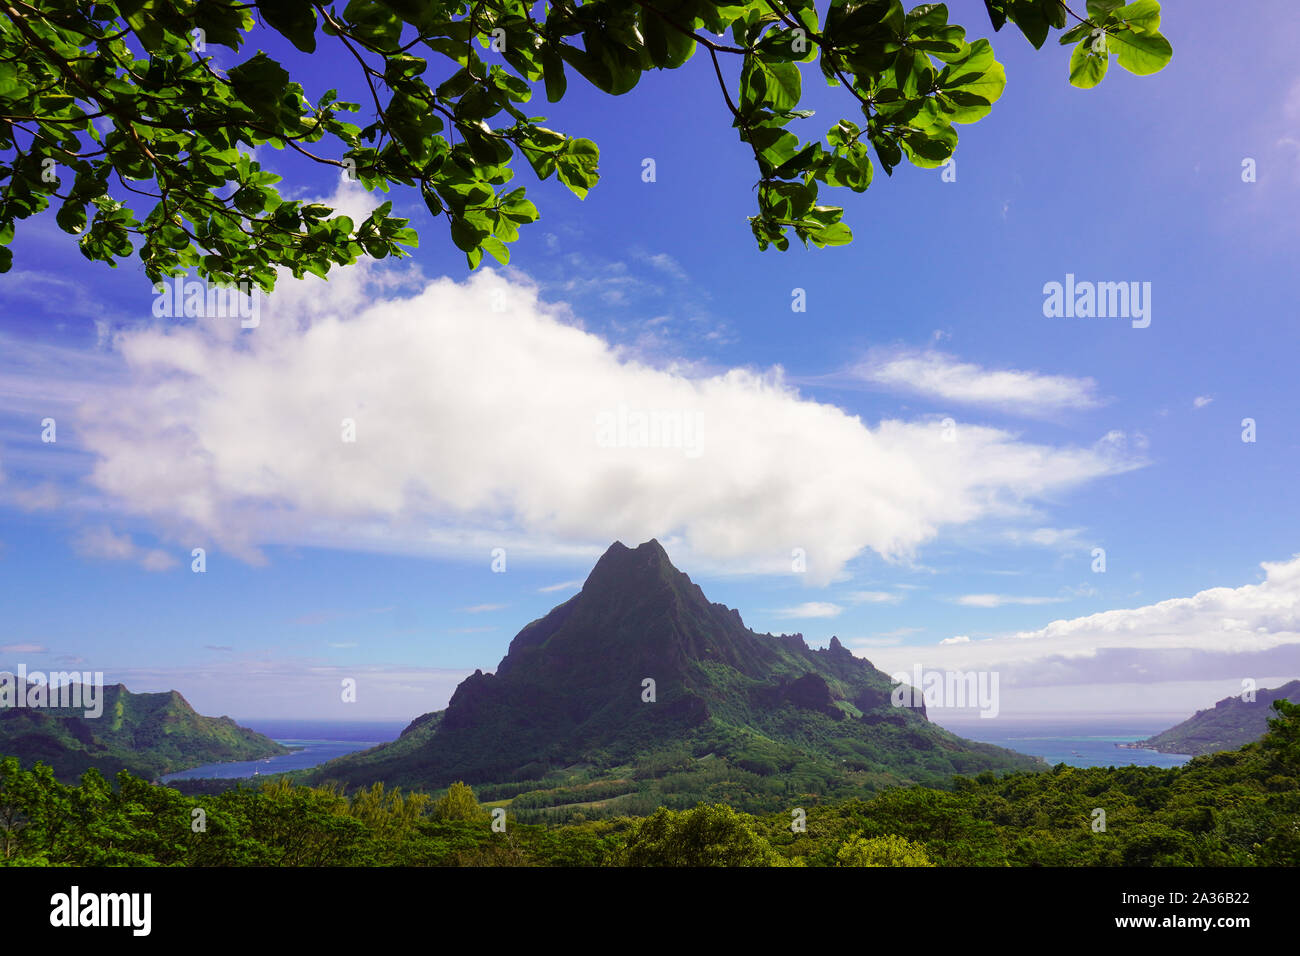 Landscape of Mt Rotui volcano rising above two bays on the island of Moorea in French Polynesia Stock Photo